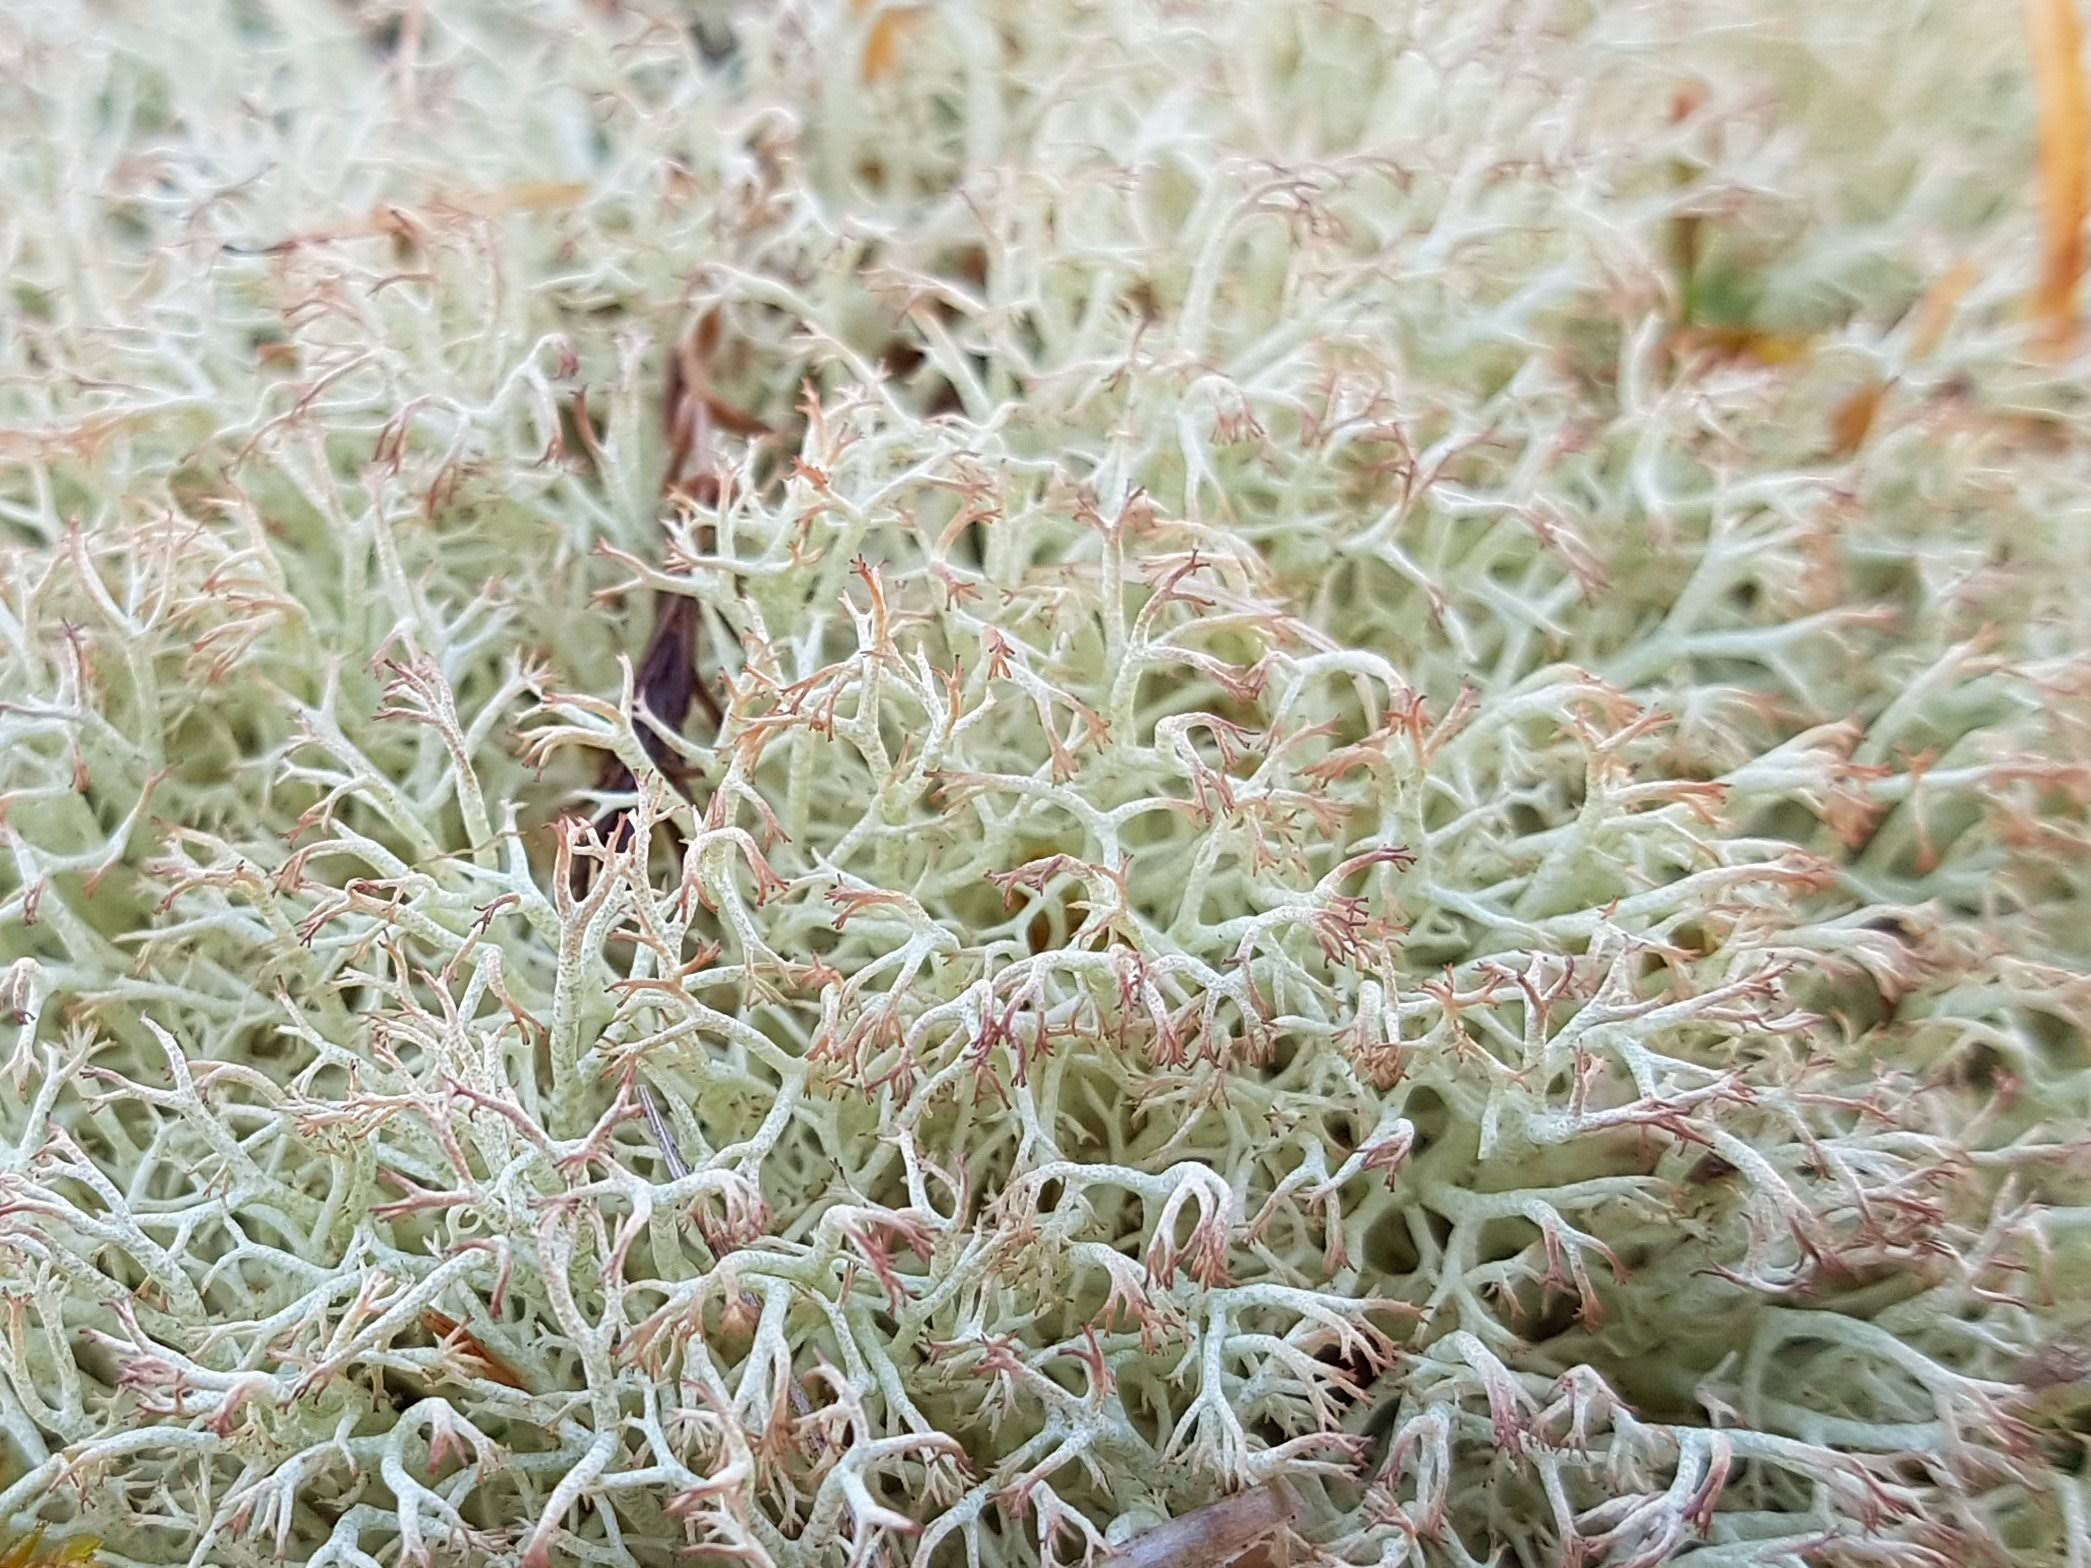 A close up of white and teal lichen